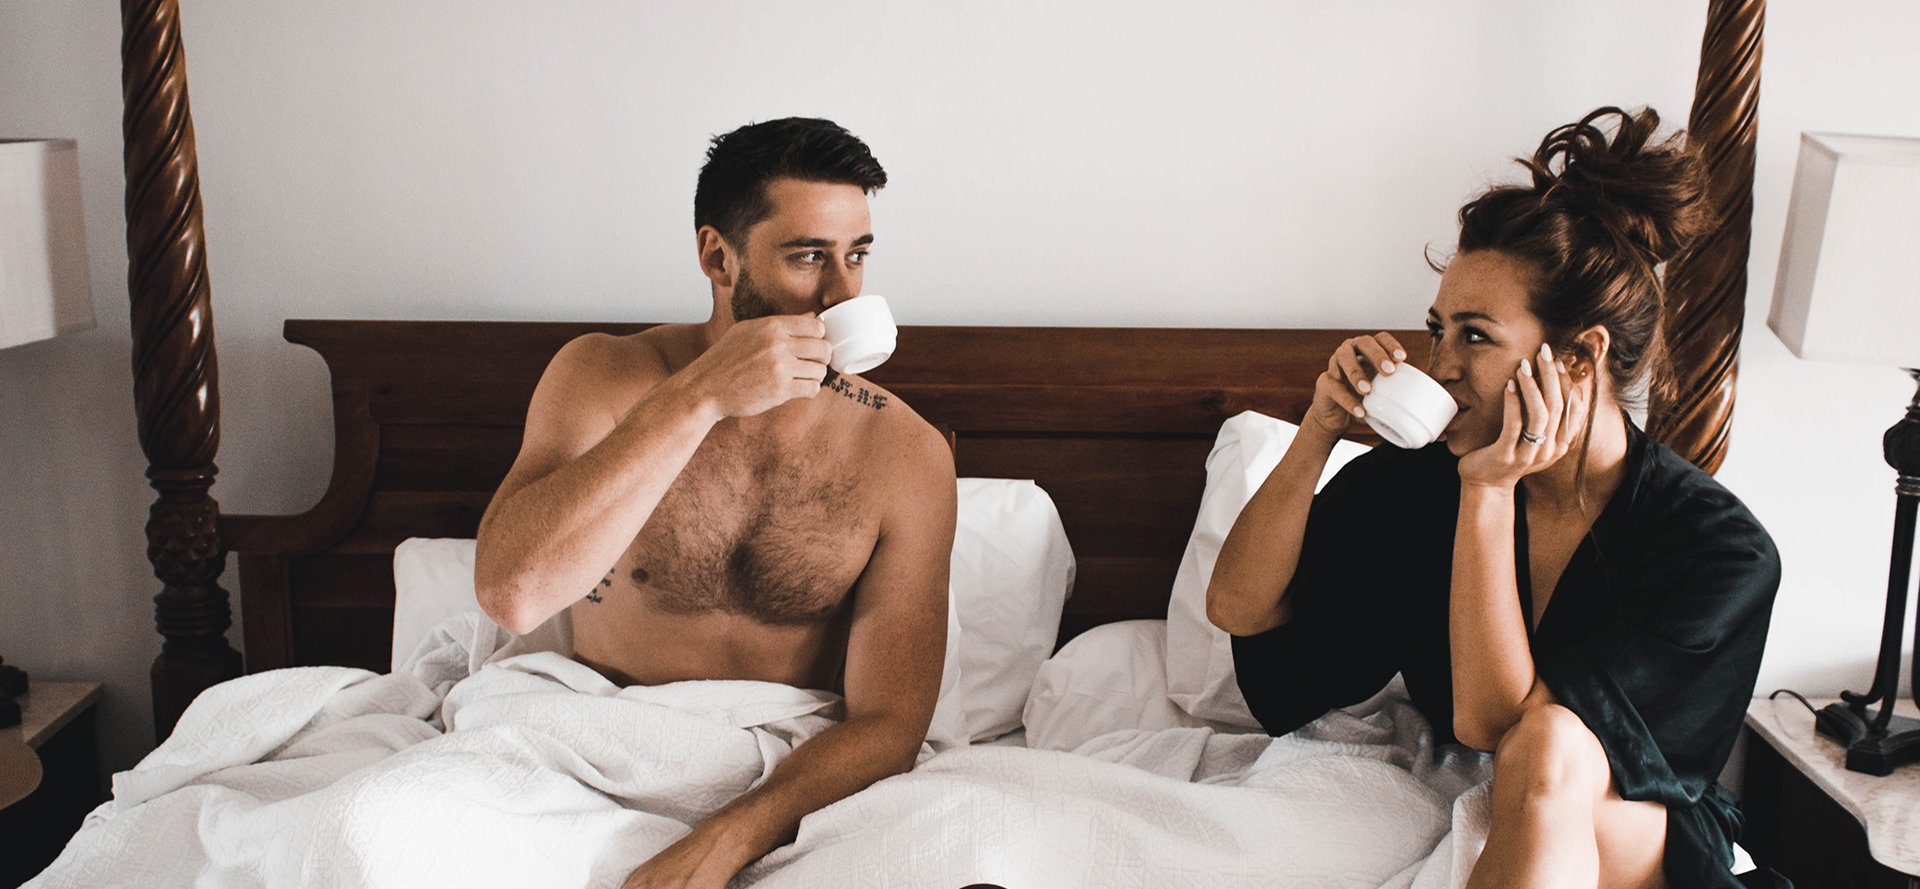 Married woman with her lover drinking coffee in bed.